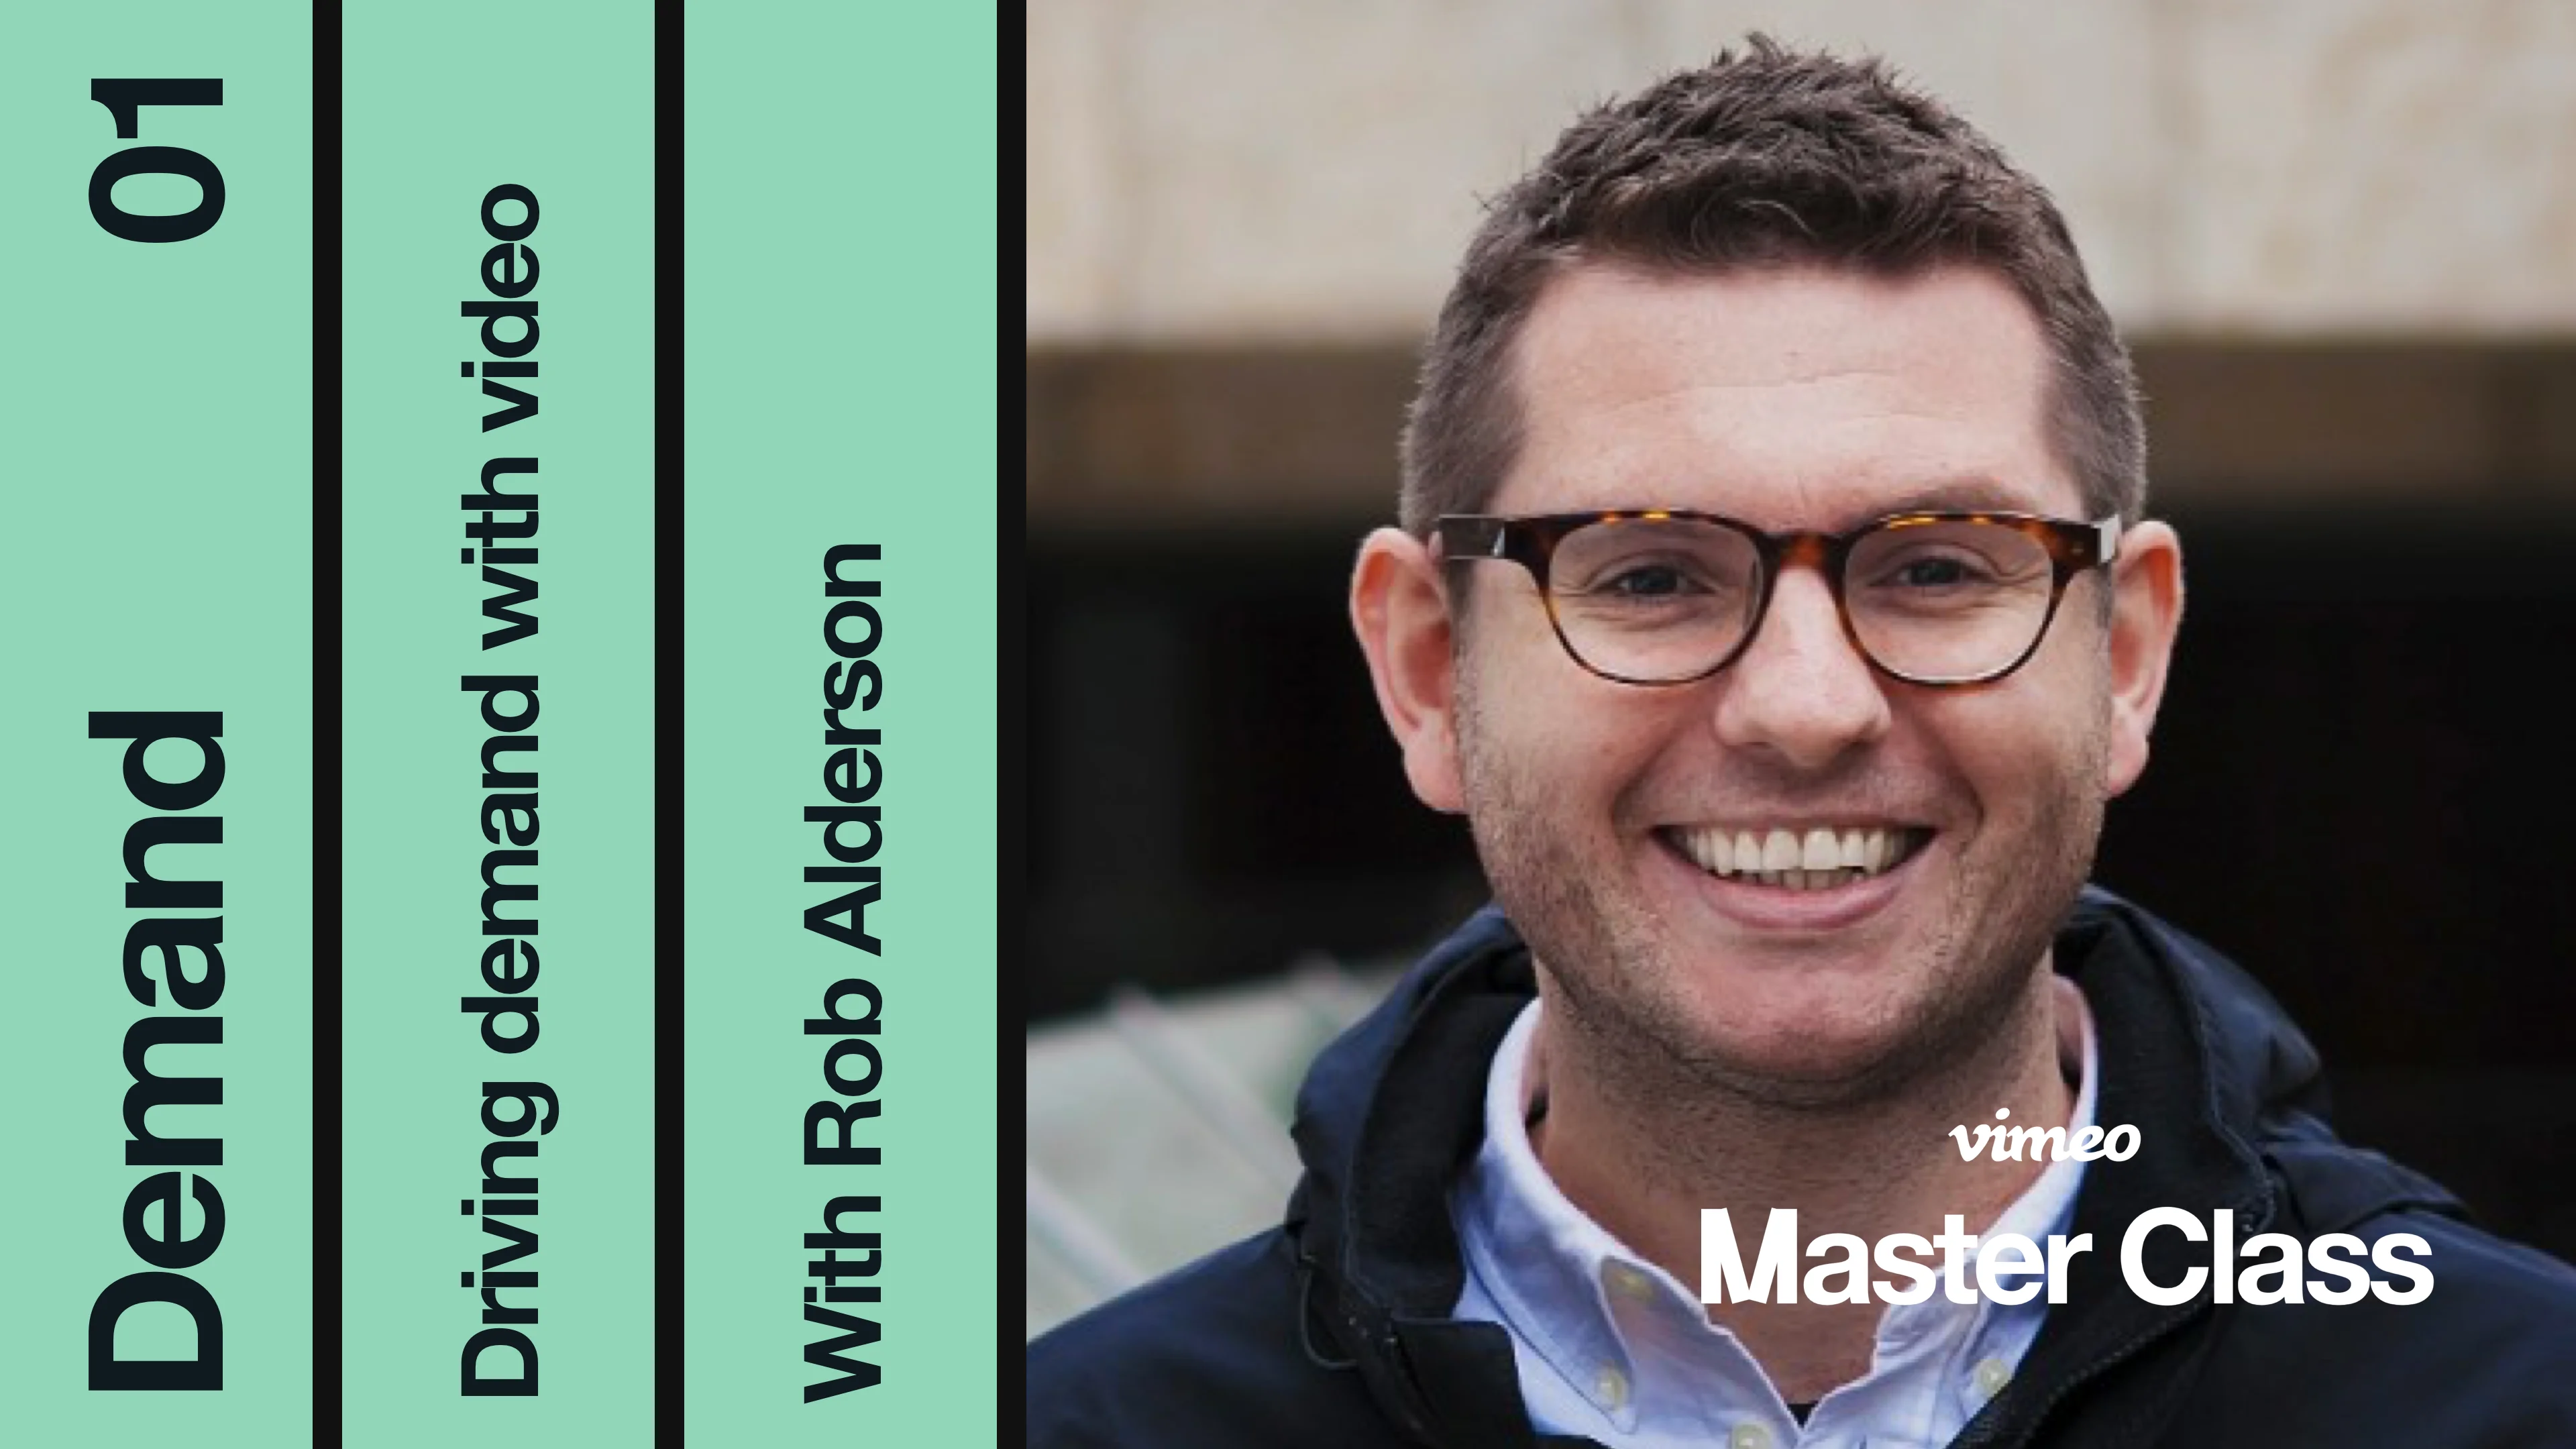 Vimeo Master Class: Courses to help grow your video business with Vimeo